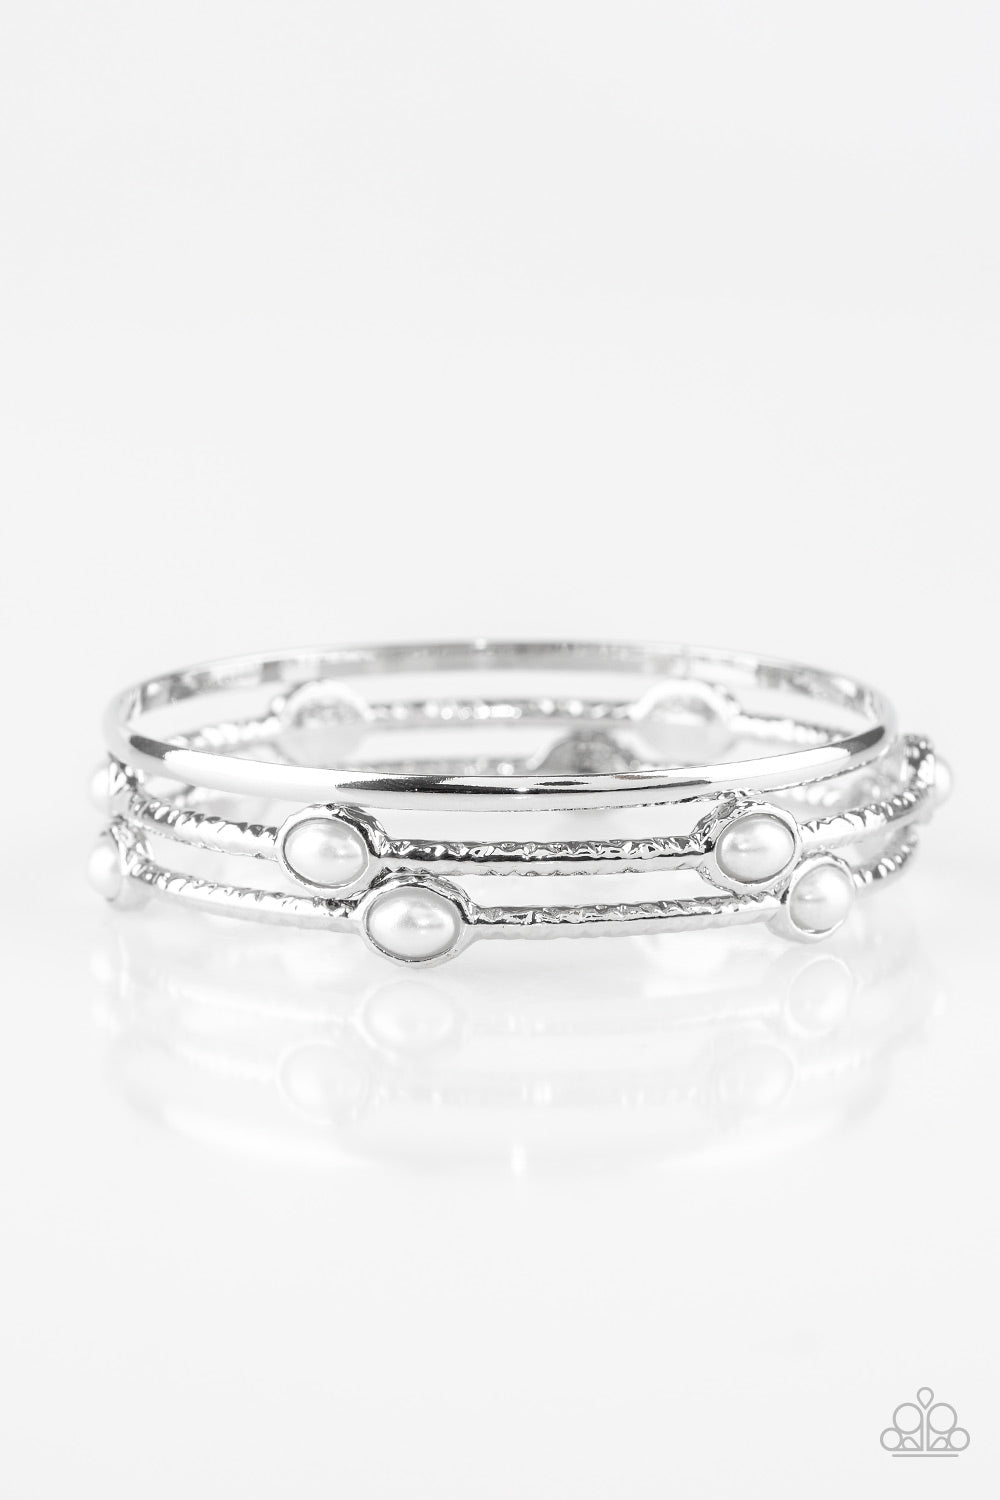 &lt;P&gt;Delicately hammered in shimmer, a pair of pearly white encrusted bangles joins a smooth silver bangle around the wrist for a refined fashion.  &lt;/P&gt;

&lt;P&gt;&lt;I&gt; Sold as one set of three bracelets.  &lt;/I&gt;&lt;/p&gt;


&lt;img src=\&quot;https://d9b54x484lq62.cloudfront.net/paparazzi/shopping/images/517_tag150x115_1.png\&quot; alt=\&quot;New Kit\&quot; align=\&quot;middle\&quot; height=\&quot;50\&quot; width=\&quot;50\&quot;/&gt;